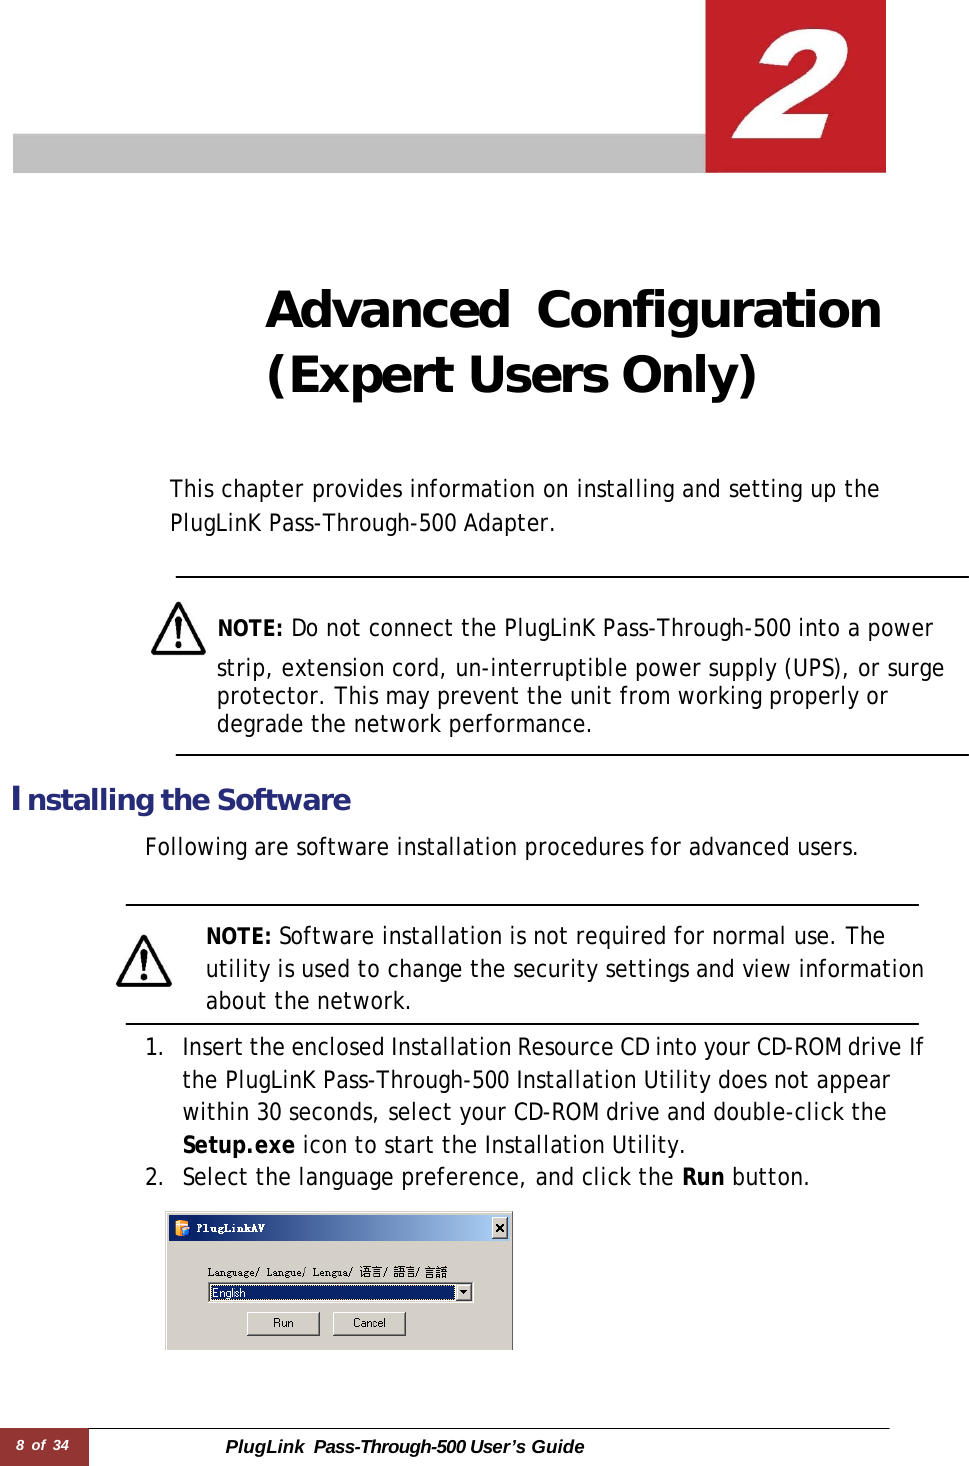 8 of 34 PlugLink  Pass-Through-500 User’s Guide        Advanced Configuration (Expert Users Only)     This chapter provides information on installing and setting up the PlugLinK Pass-Through-500 Adapter.      NOTE: Do not connect the PlugLinK Pass-Through-500 into a power strip, extension cord, un-interruptible power supply (UPS), or surge protector. This may prevent the unit from working properly or degrade the network performance.    Installing the Software  Following are software installation procedures for advanced users.    NOTE: Software installation is not required for normal use. The utility is used to change the security settings and view information about the network.  1. Insert the enclosed Installation Resource CD into your CD-ROM drive If the PlugLinK Pass-Through-500 Installation Utility does not appear within 30 seconds, select your CD-ROM drive and double-click the Setup.exe icon to start the Installation Utility. 2. Select the language preference, and click the Run button.   